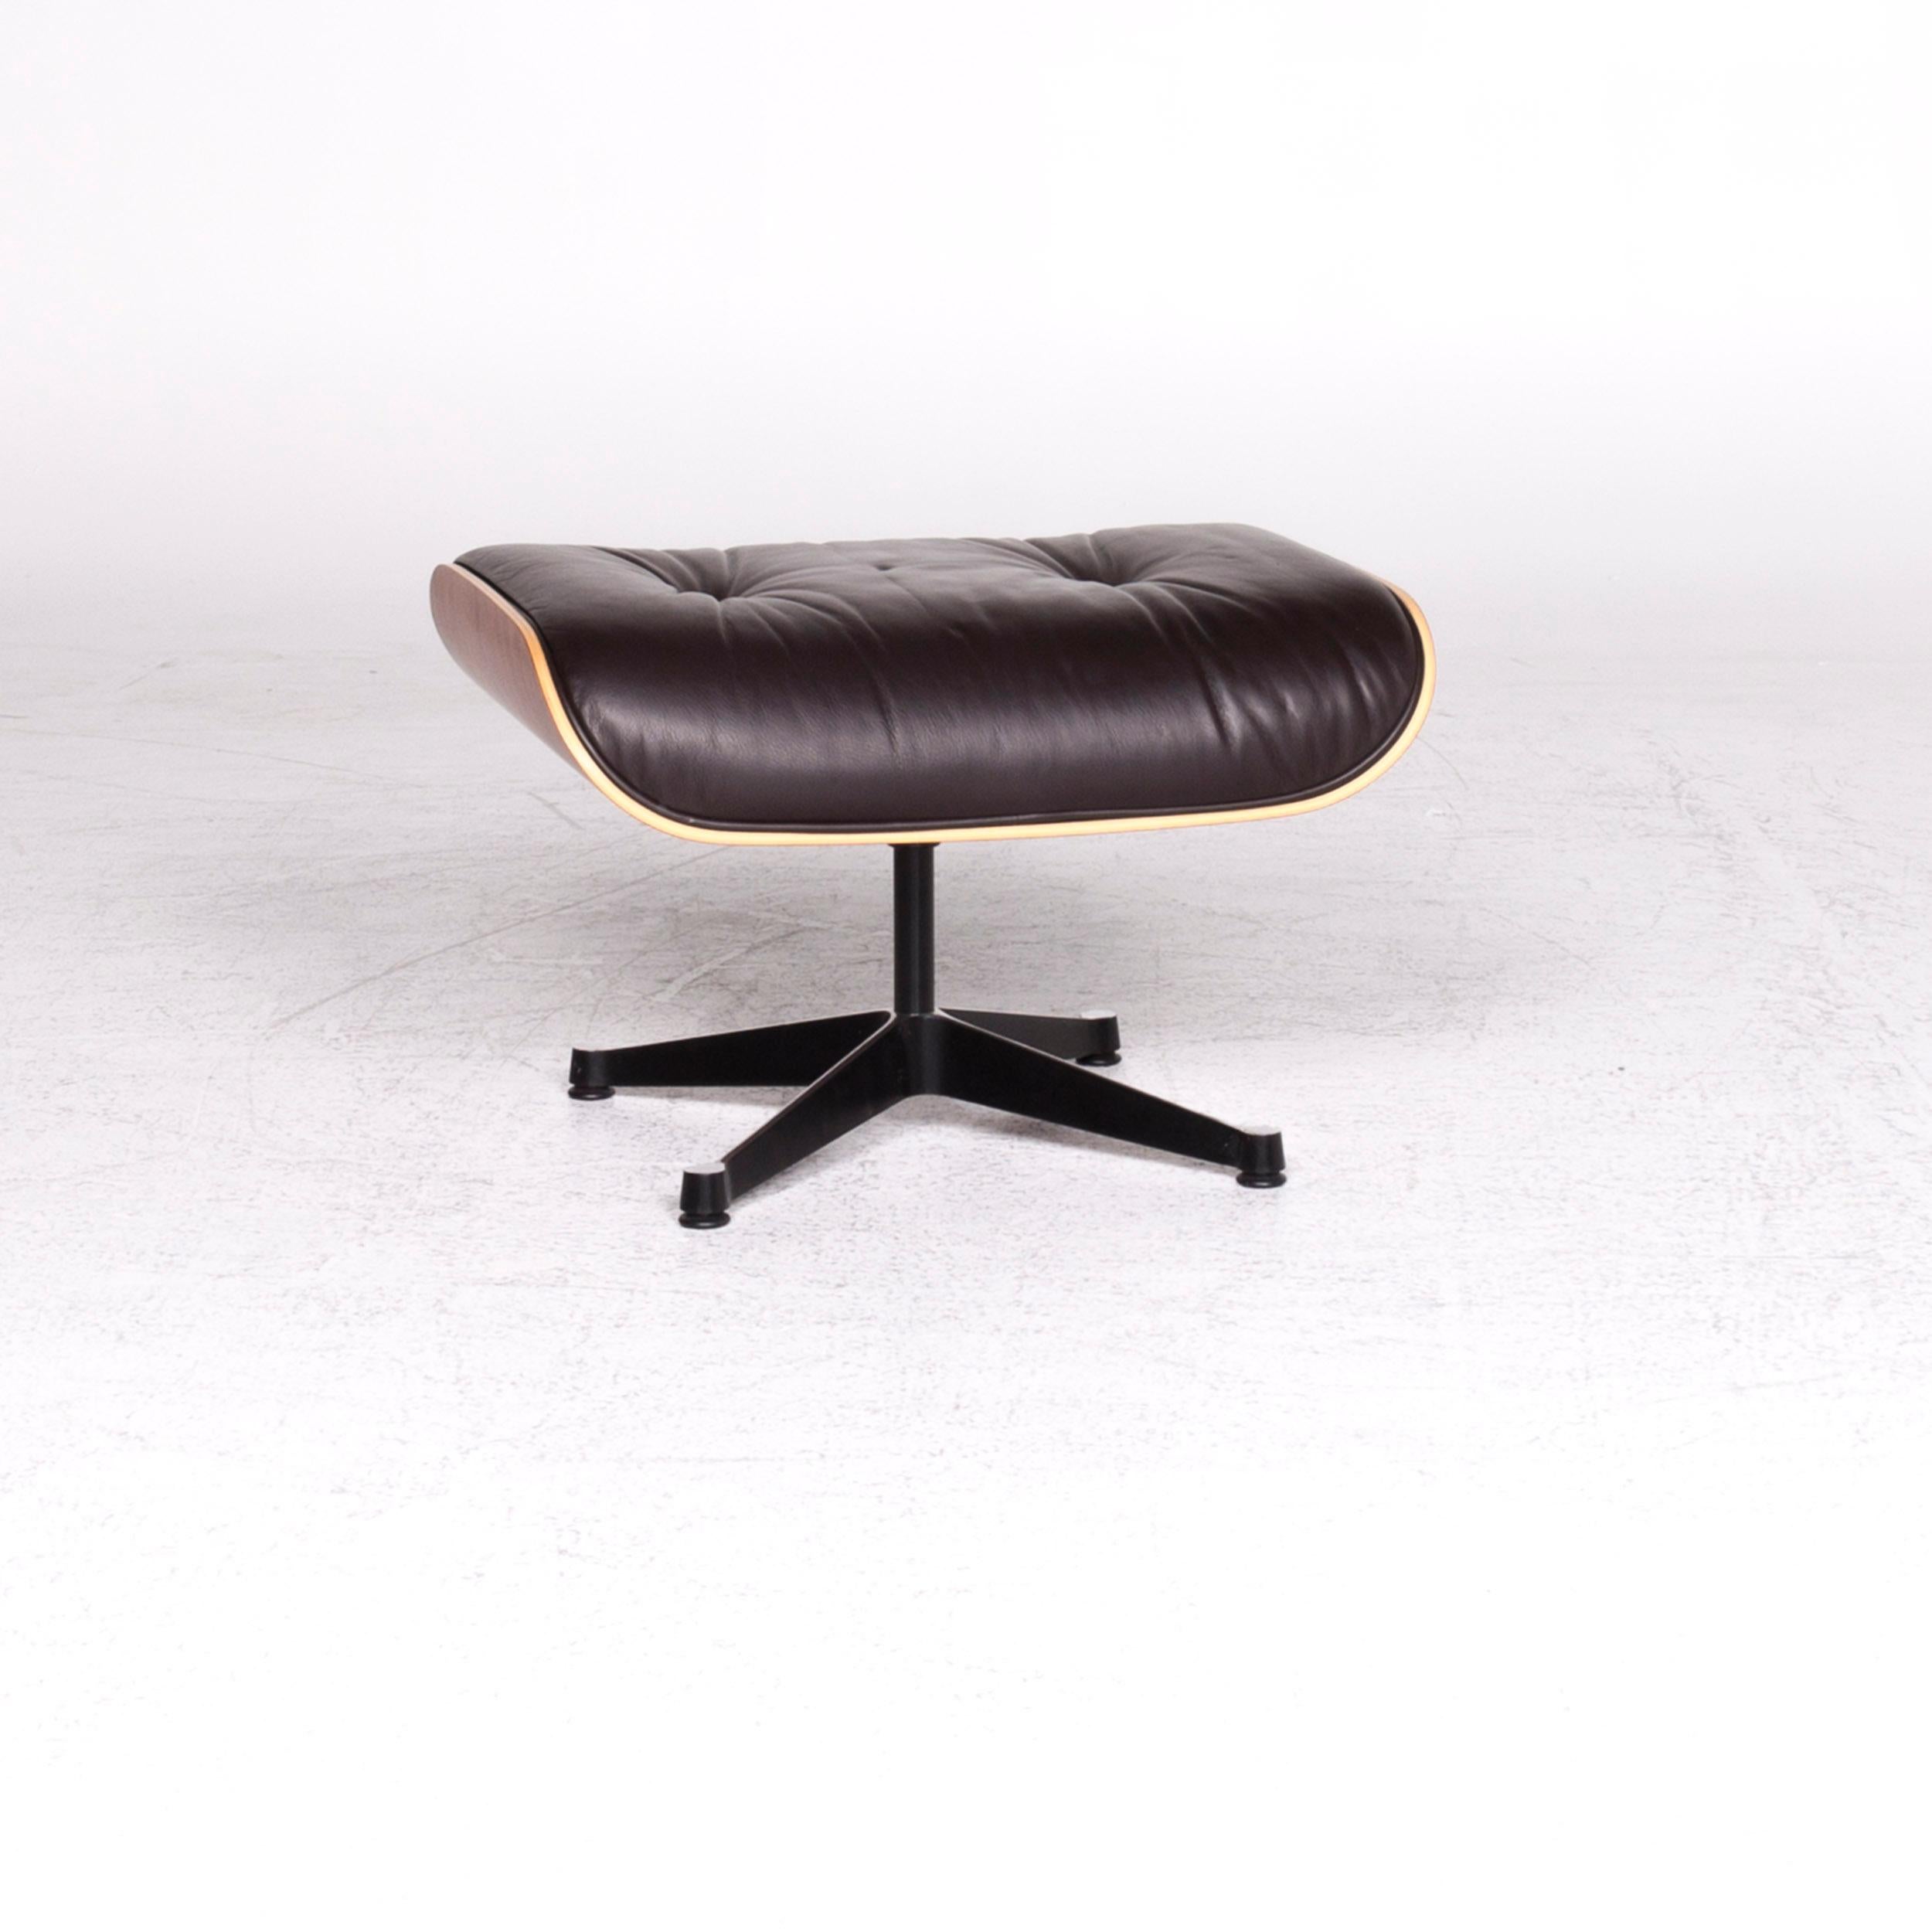 We bring to you a Vitra Eames lounge chair leather stool brown Charles & Ray Eames chair.

 
 Product measurements in centimeters:
 
 Depth: 54
 Width: 64
 Height: 42.




 